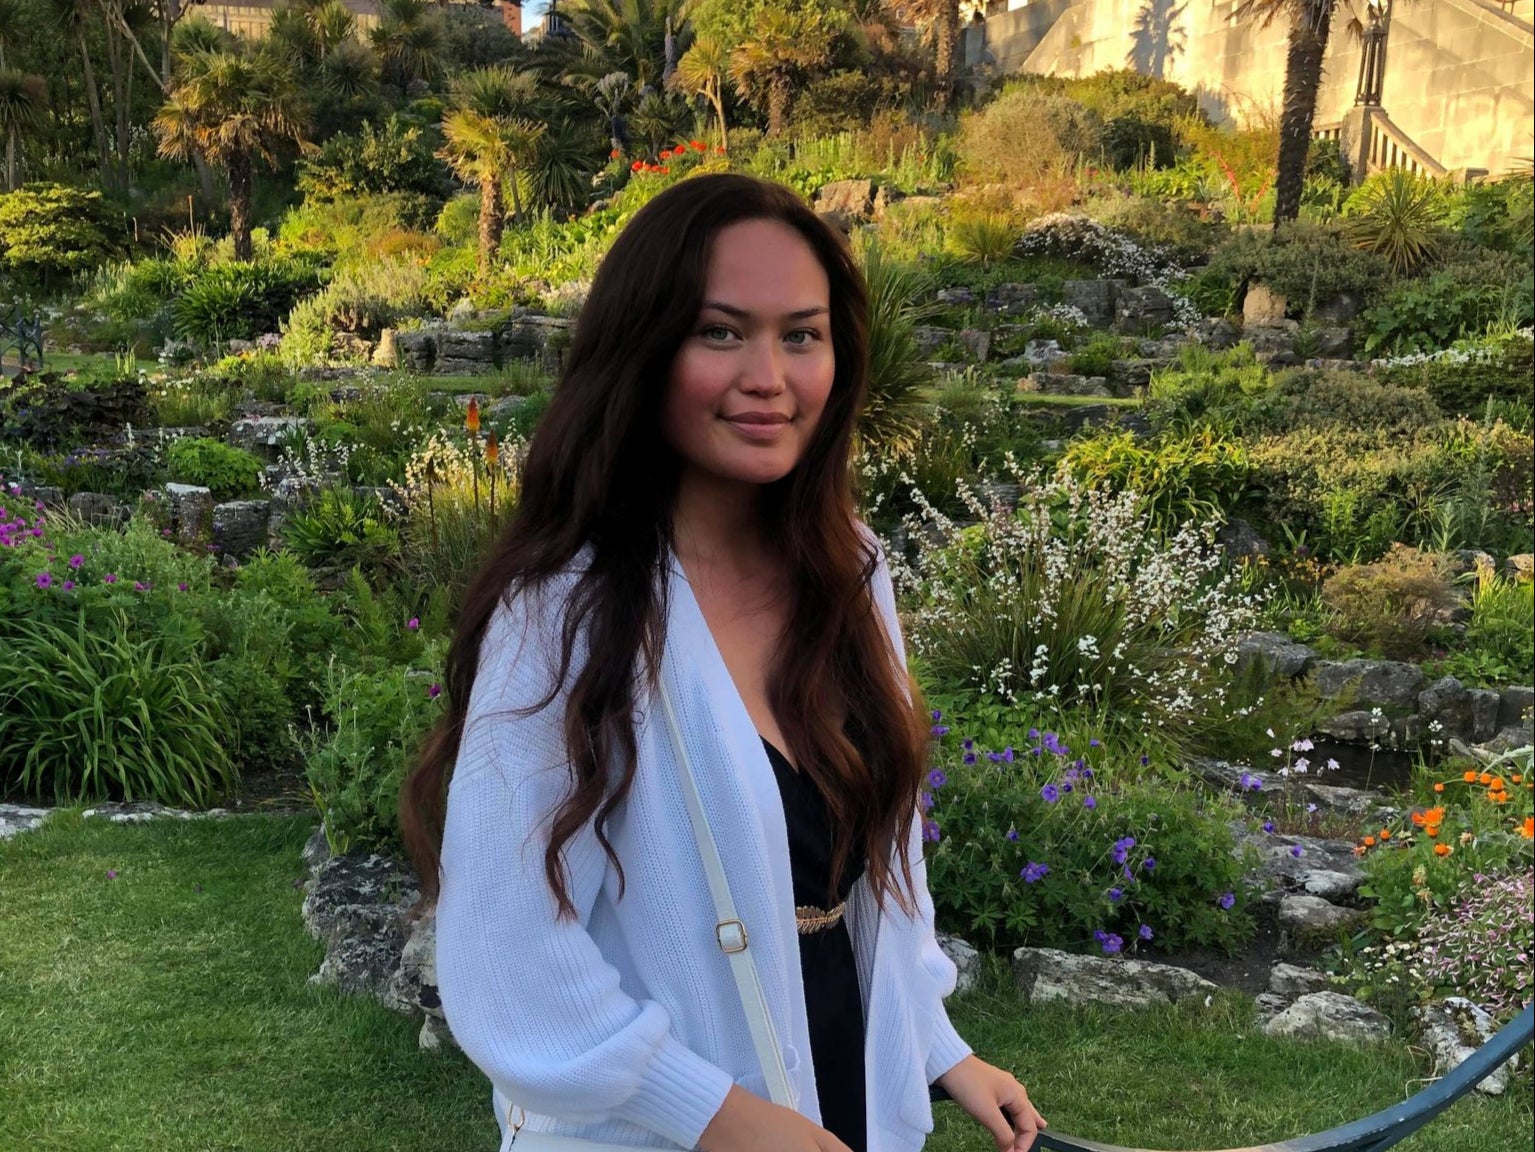 Caleb-Jade Tuera said she was ‘extremely worried’ about her finances, as without a visa extension she will not be able to work lawfully in the UK from 30 June